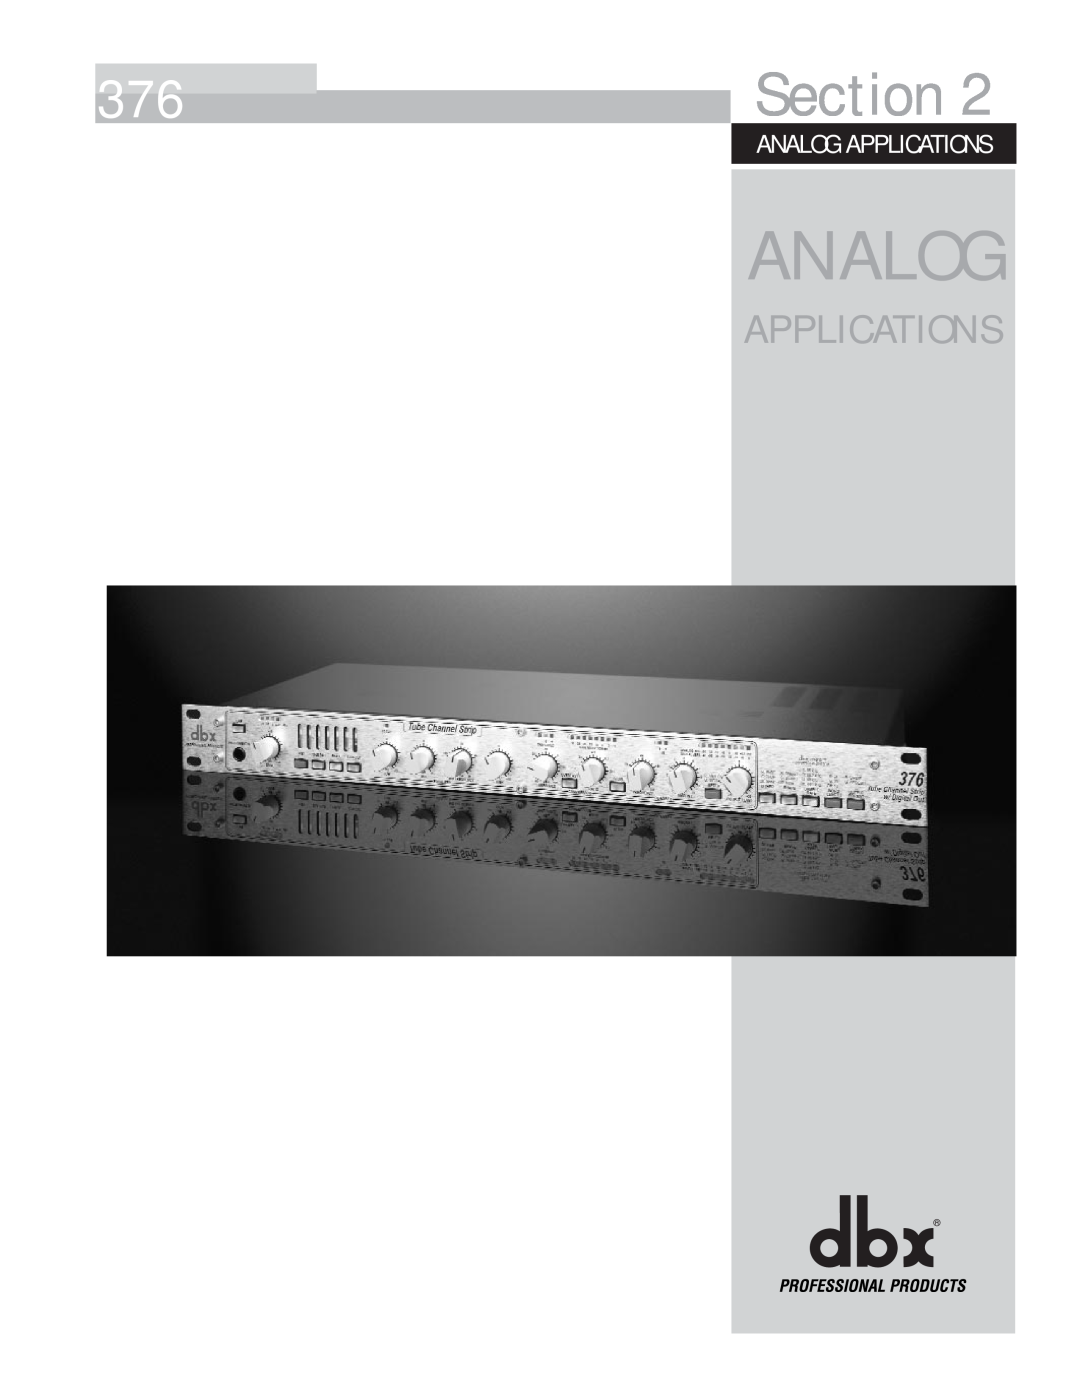 dbx Pro 376 user manual Analog Applications, Section 